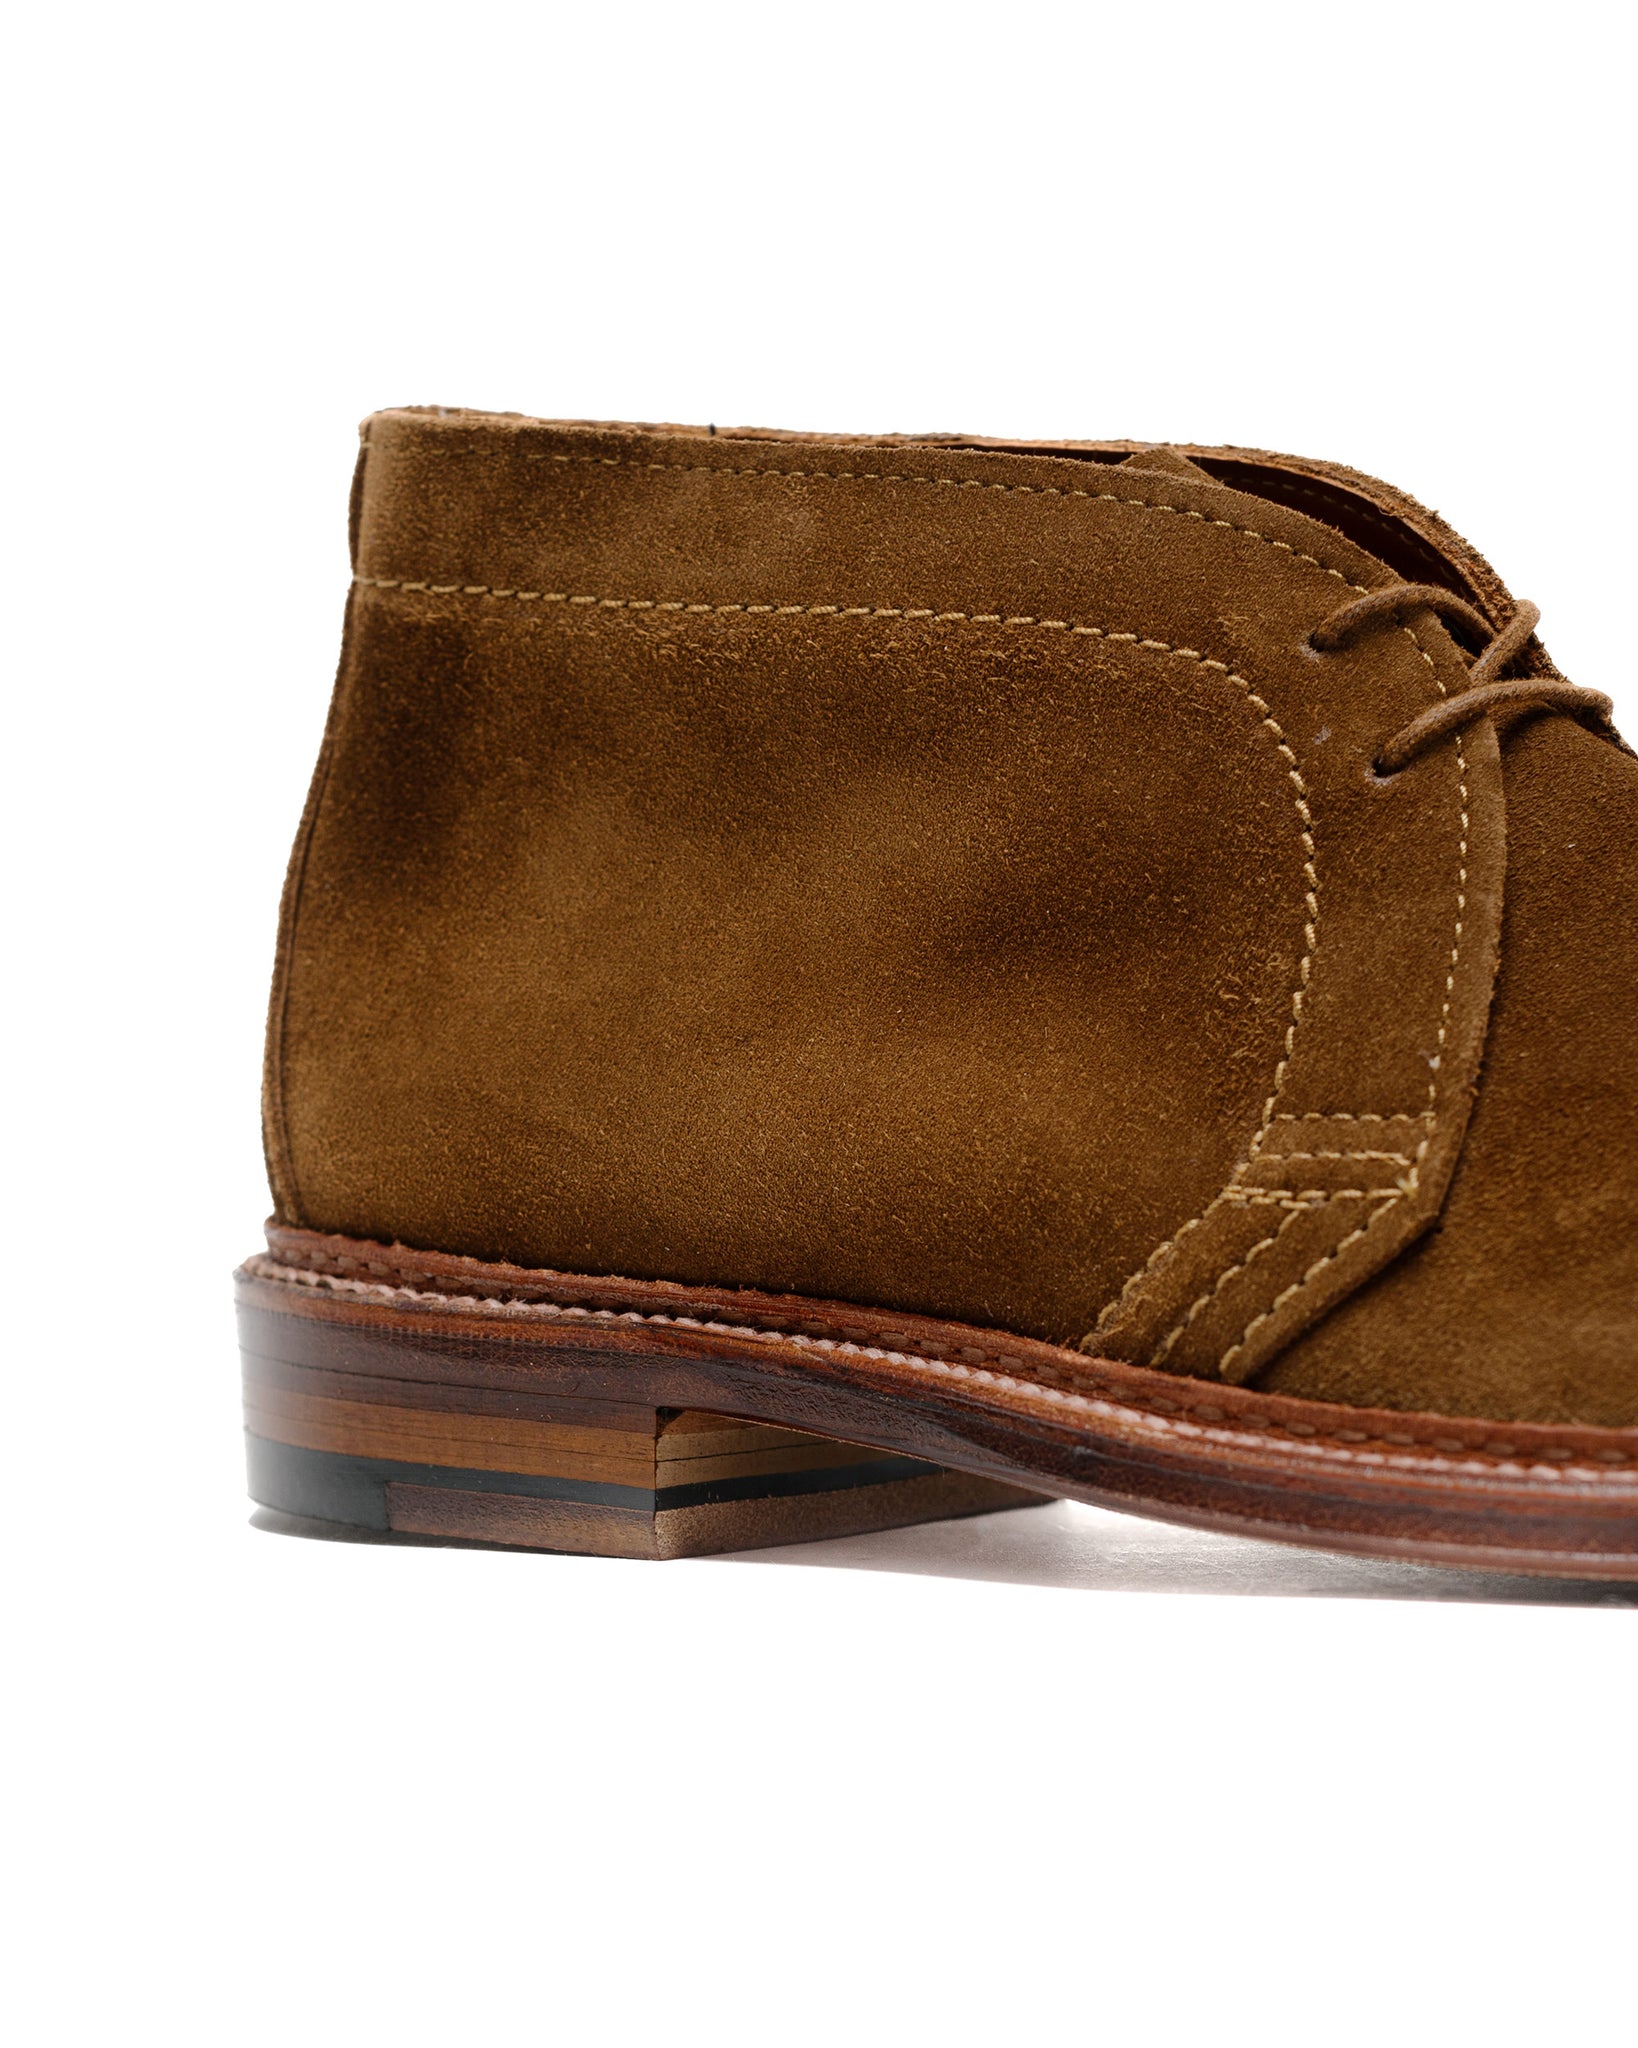 Alden Unlined Chukka Boot Snuff Suede 1493 Sole Detail